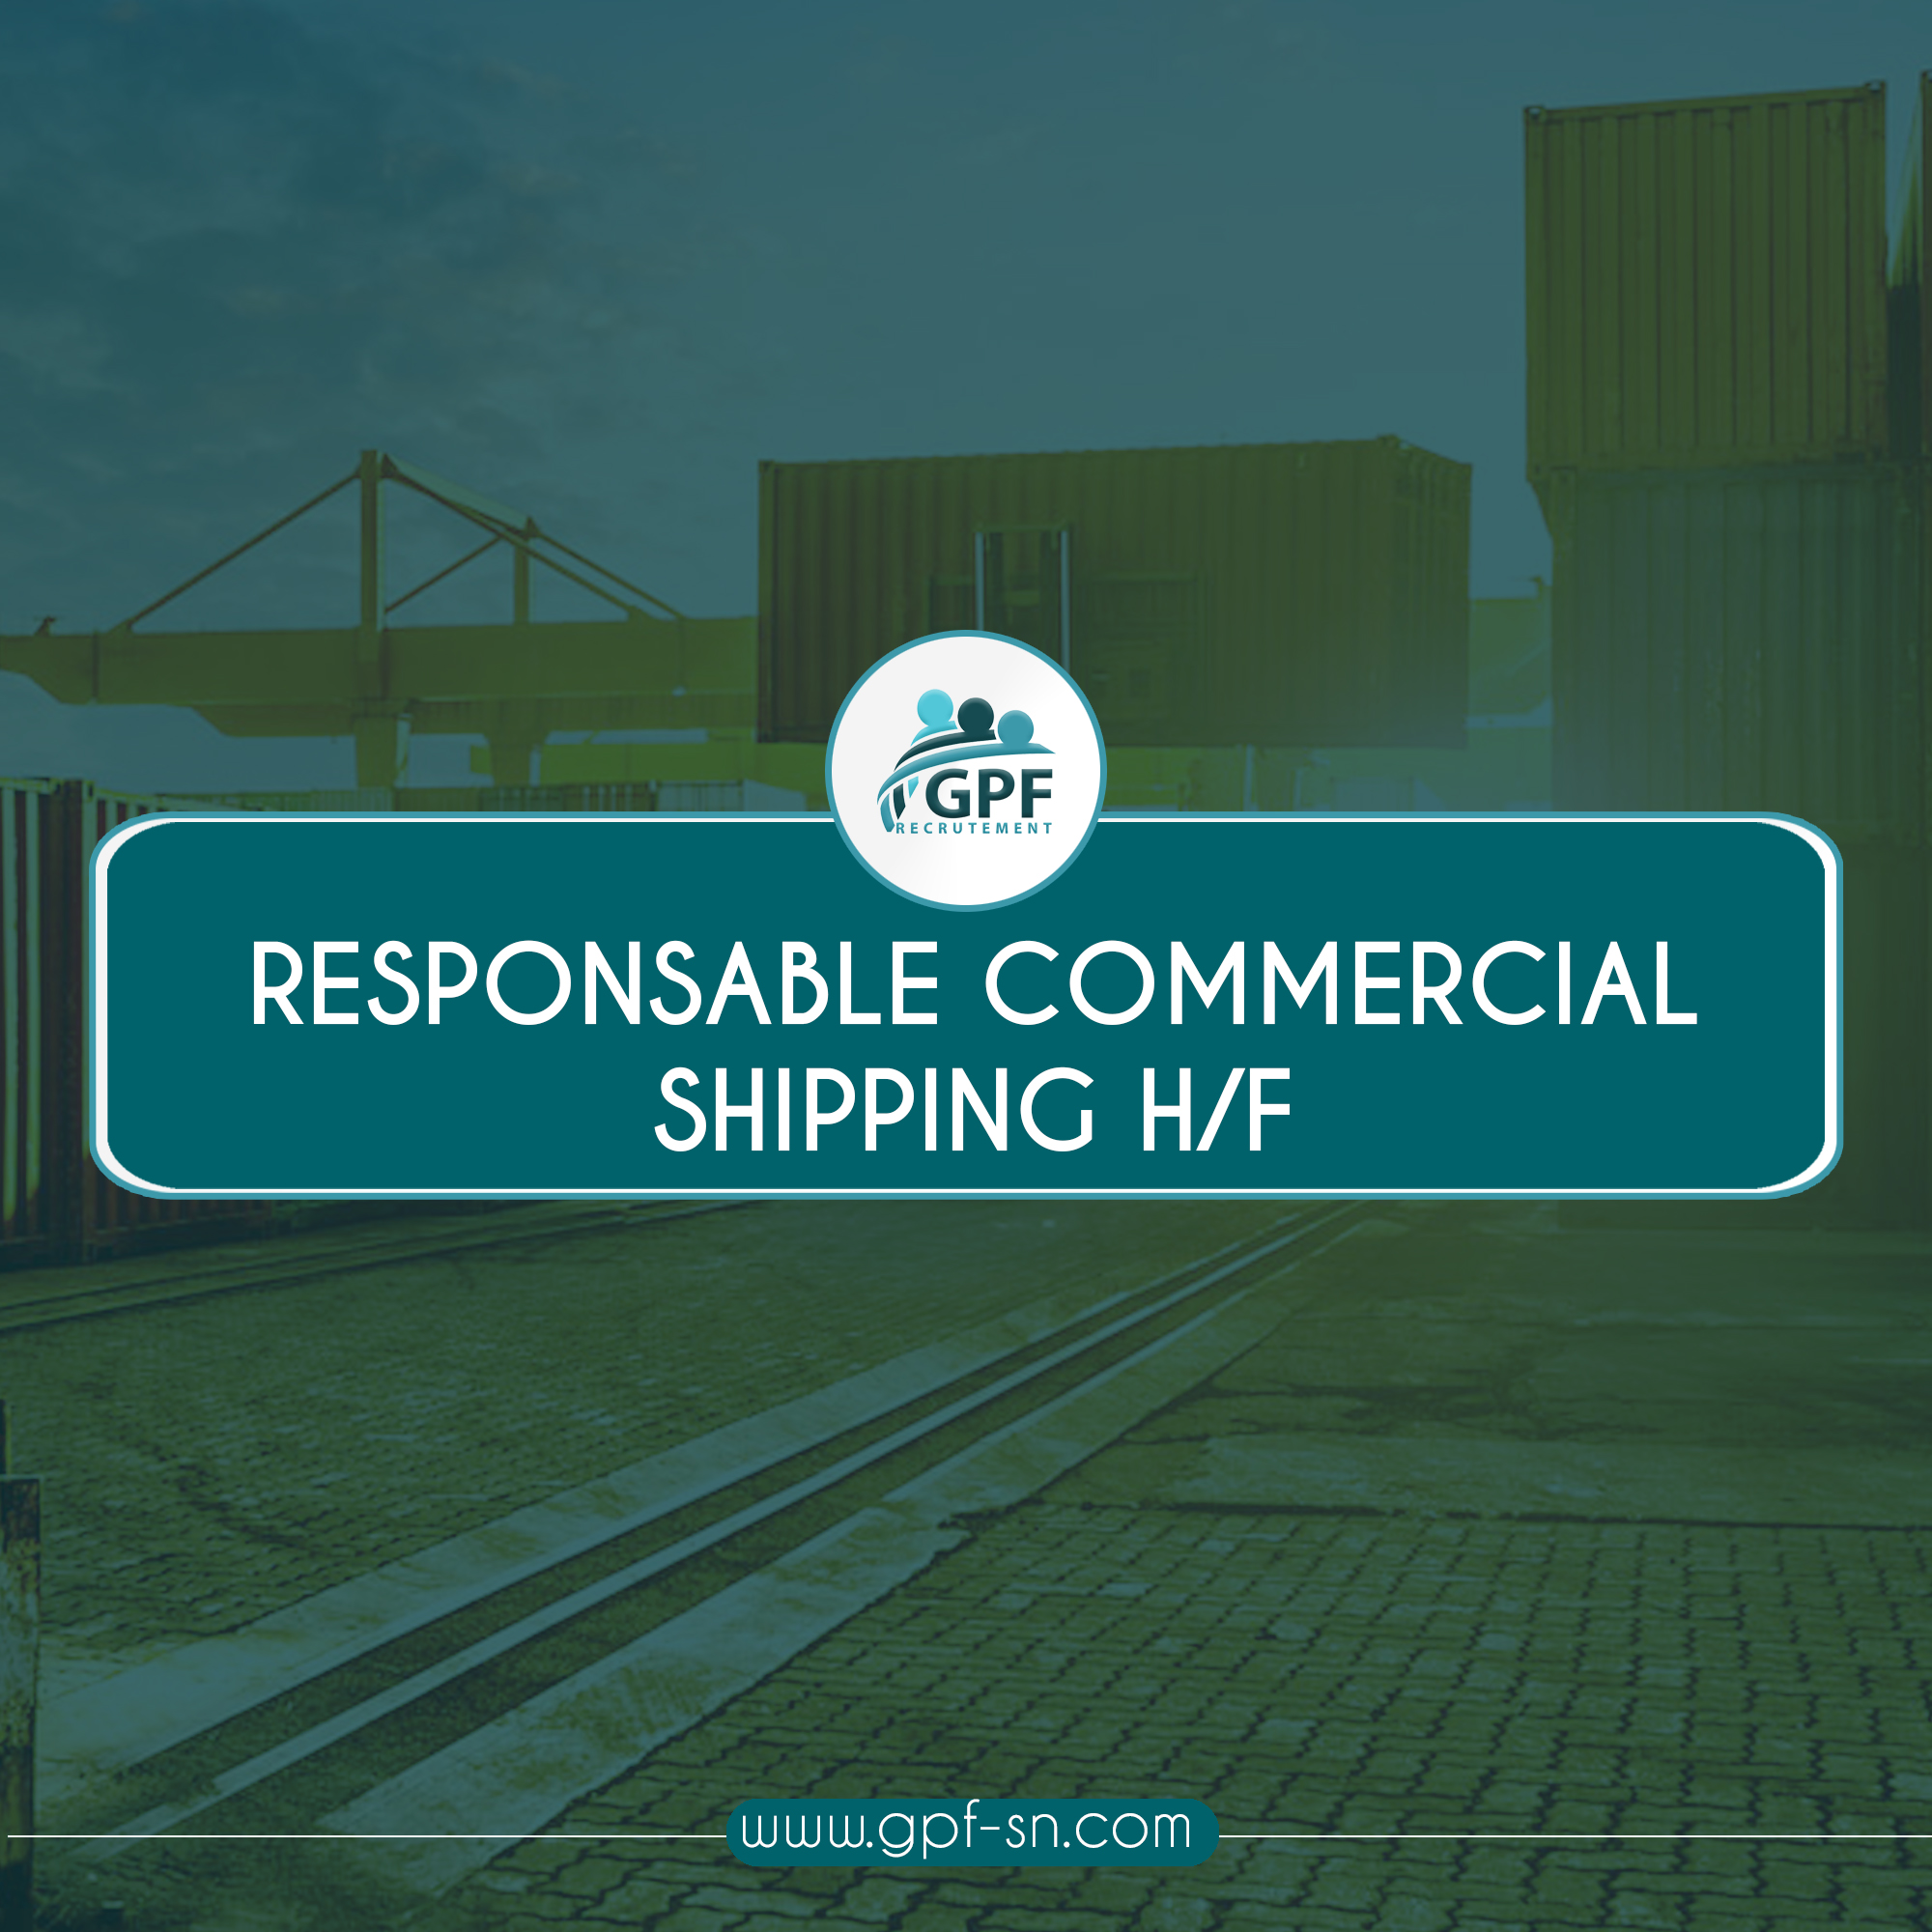 RESPONSABLE COMMERCIAL SHIPPING H:F t job-Récupéré-Récupéré-Récupéré-Récupéré